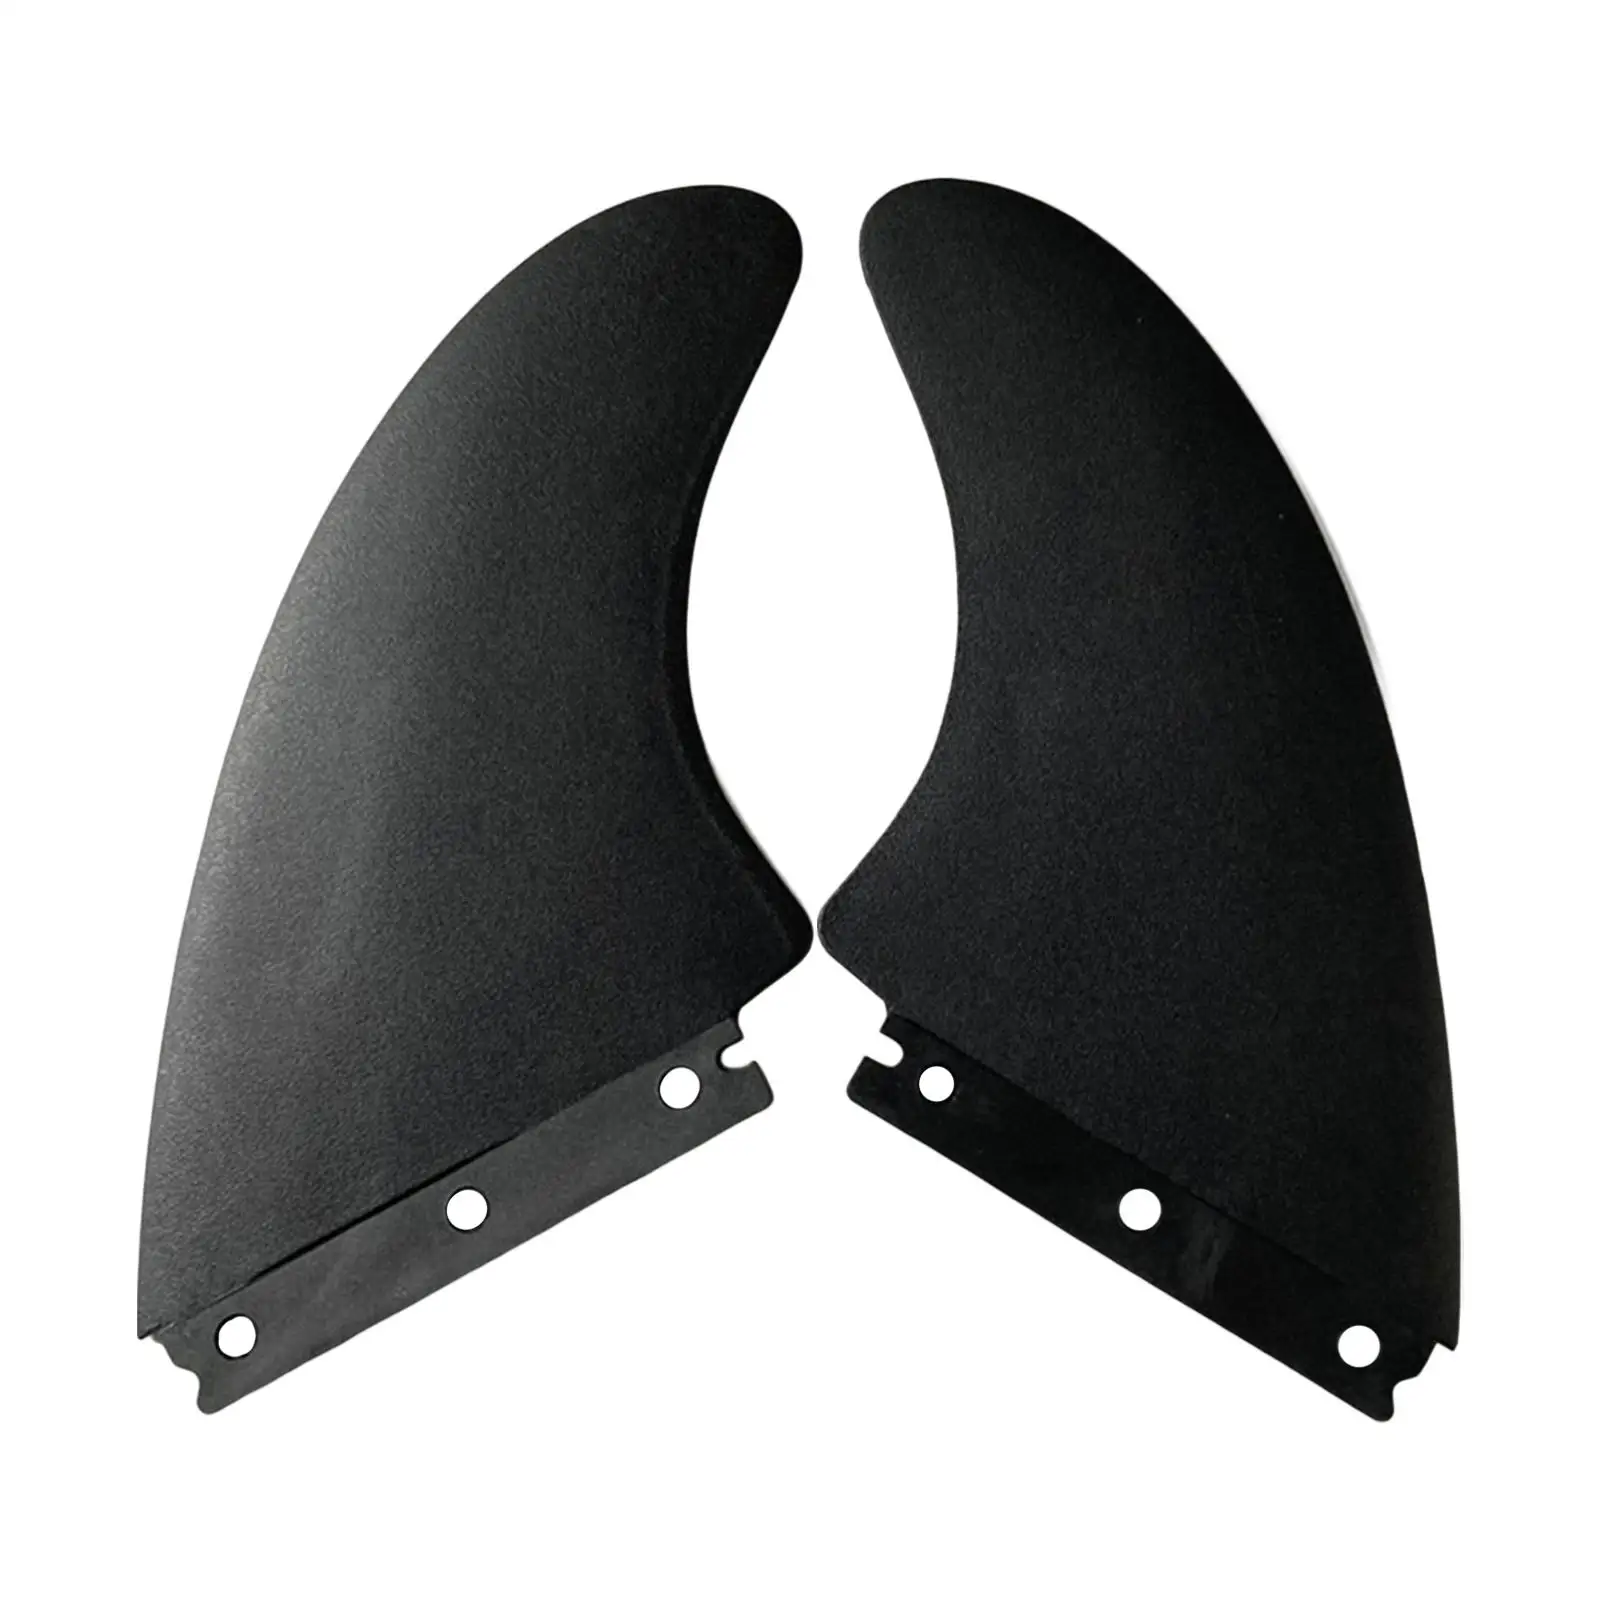 2x Surfboard Fins Water Distributor Replacement Fin Surfing Fin for Canoe